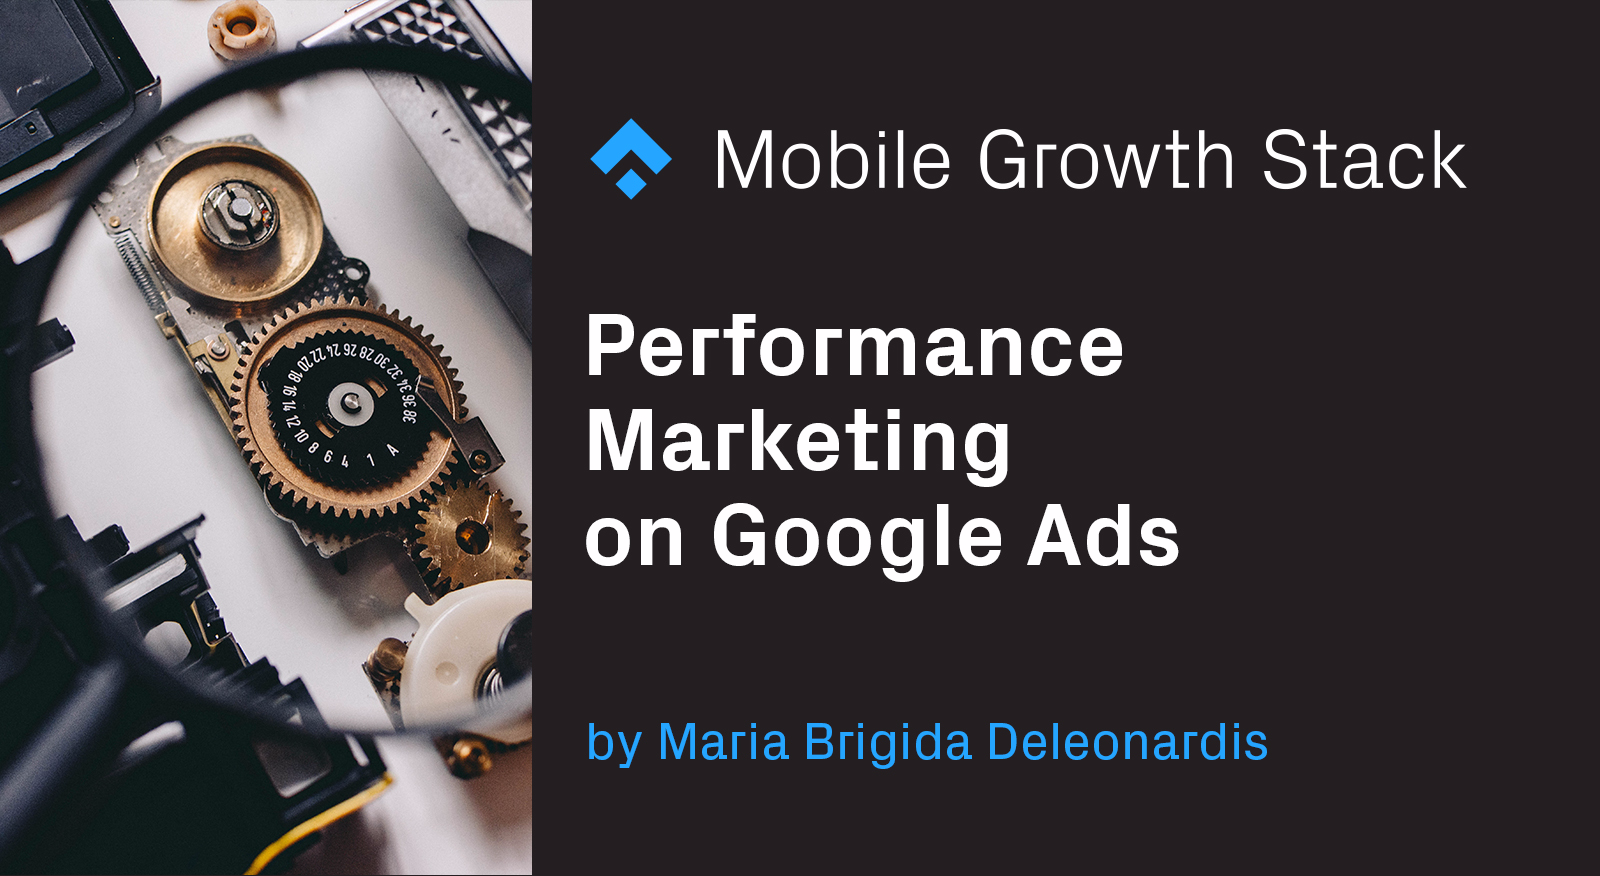 Let’s talk about Performance Marketing on Google Ads